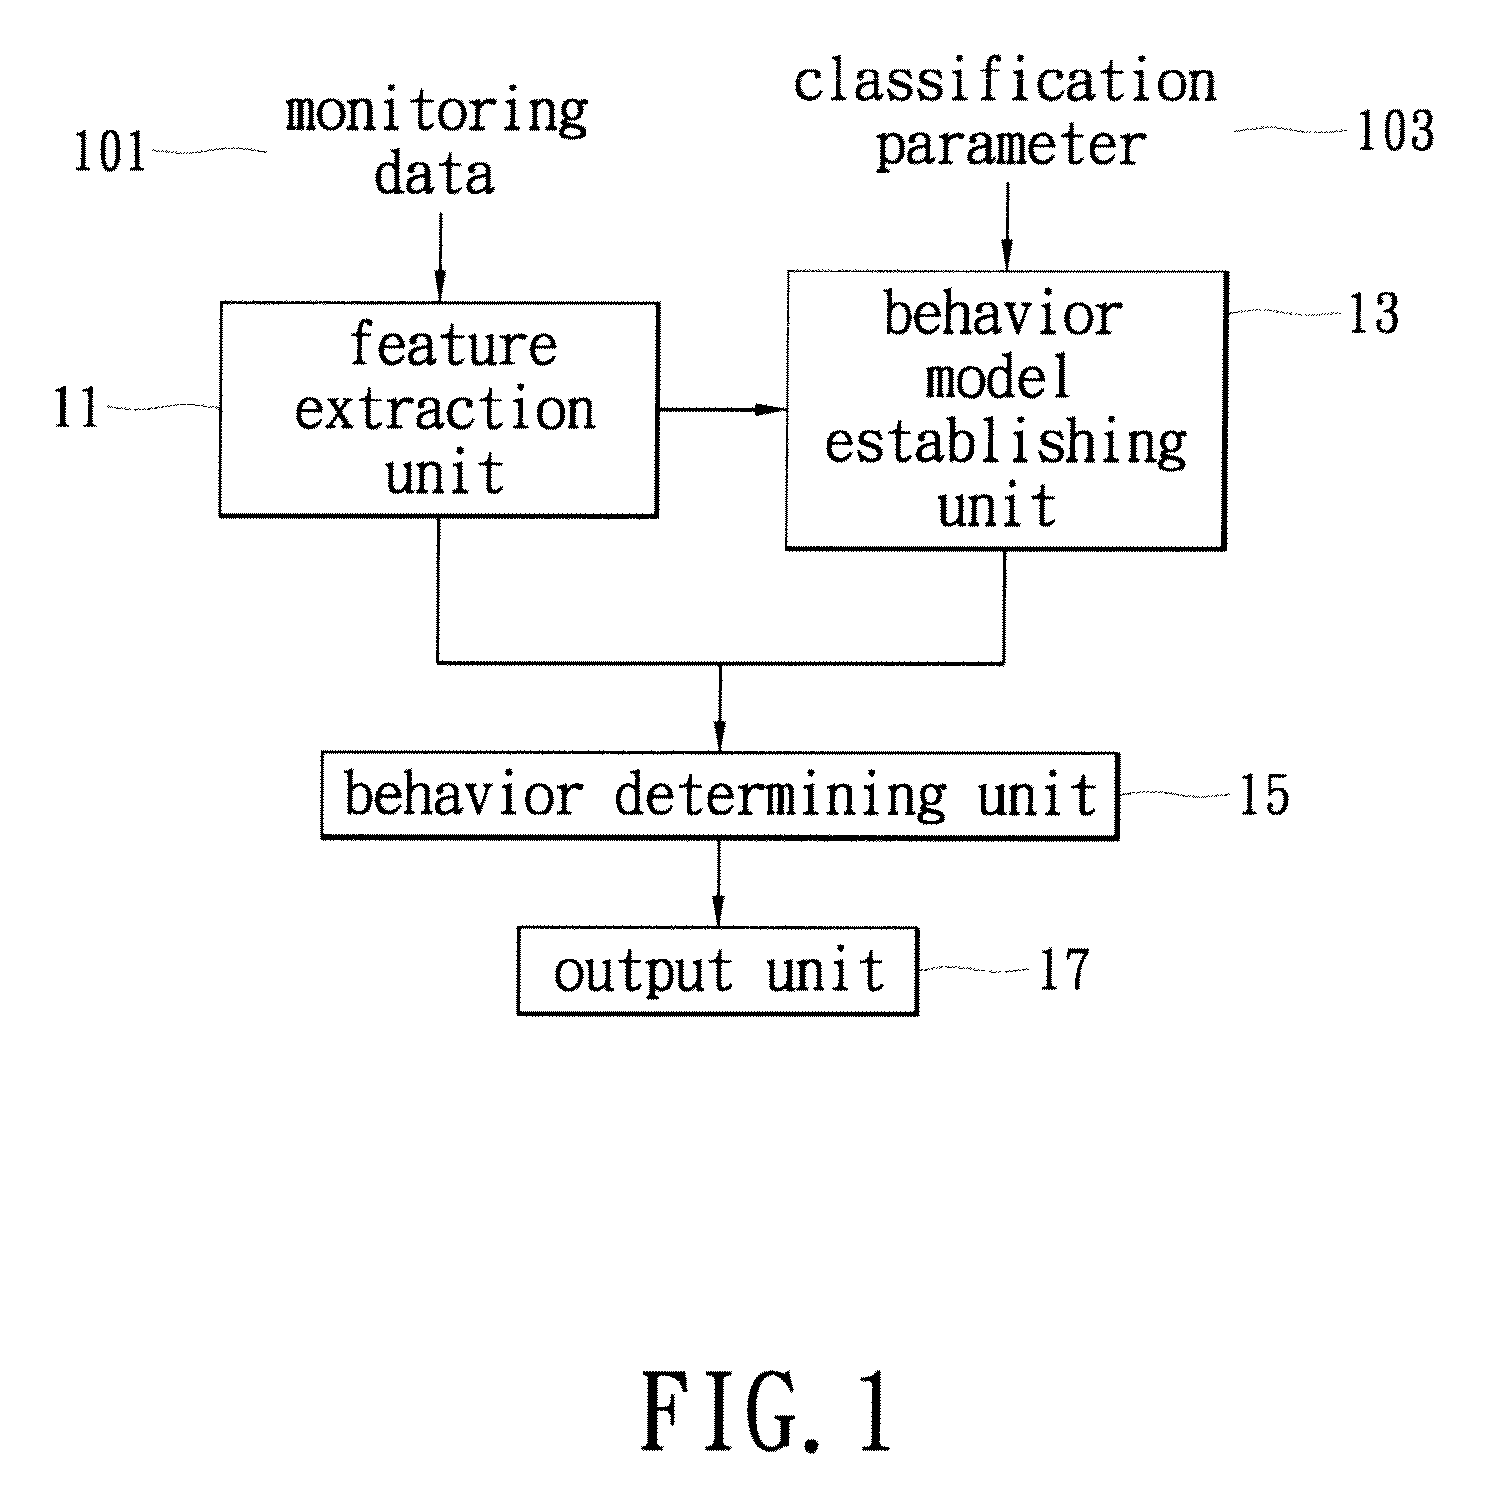 Abnormal behavior detection system and method using automatic classification of multiple features